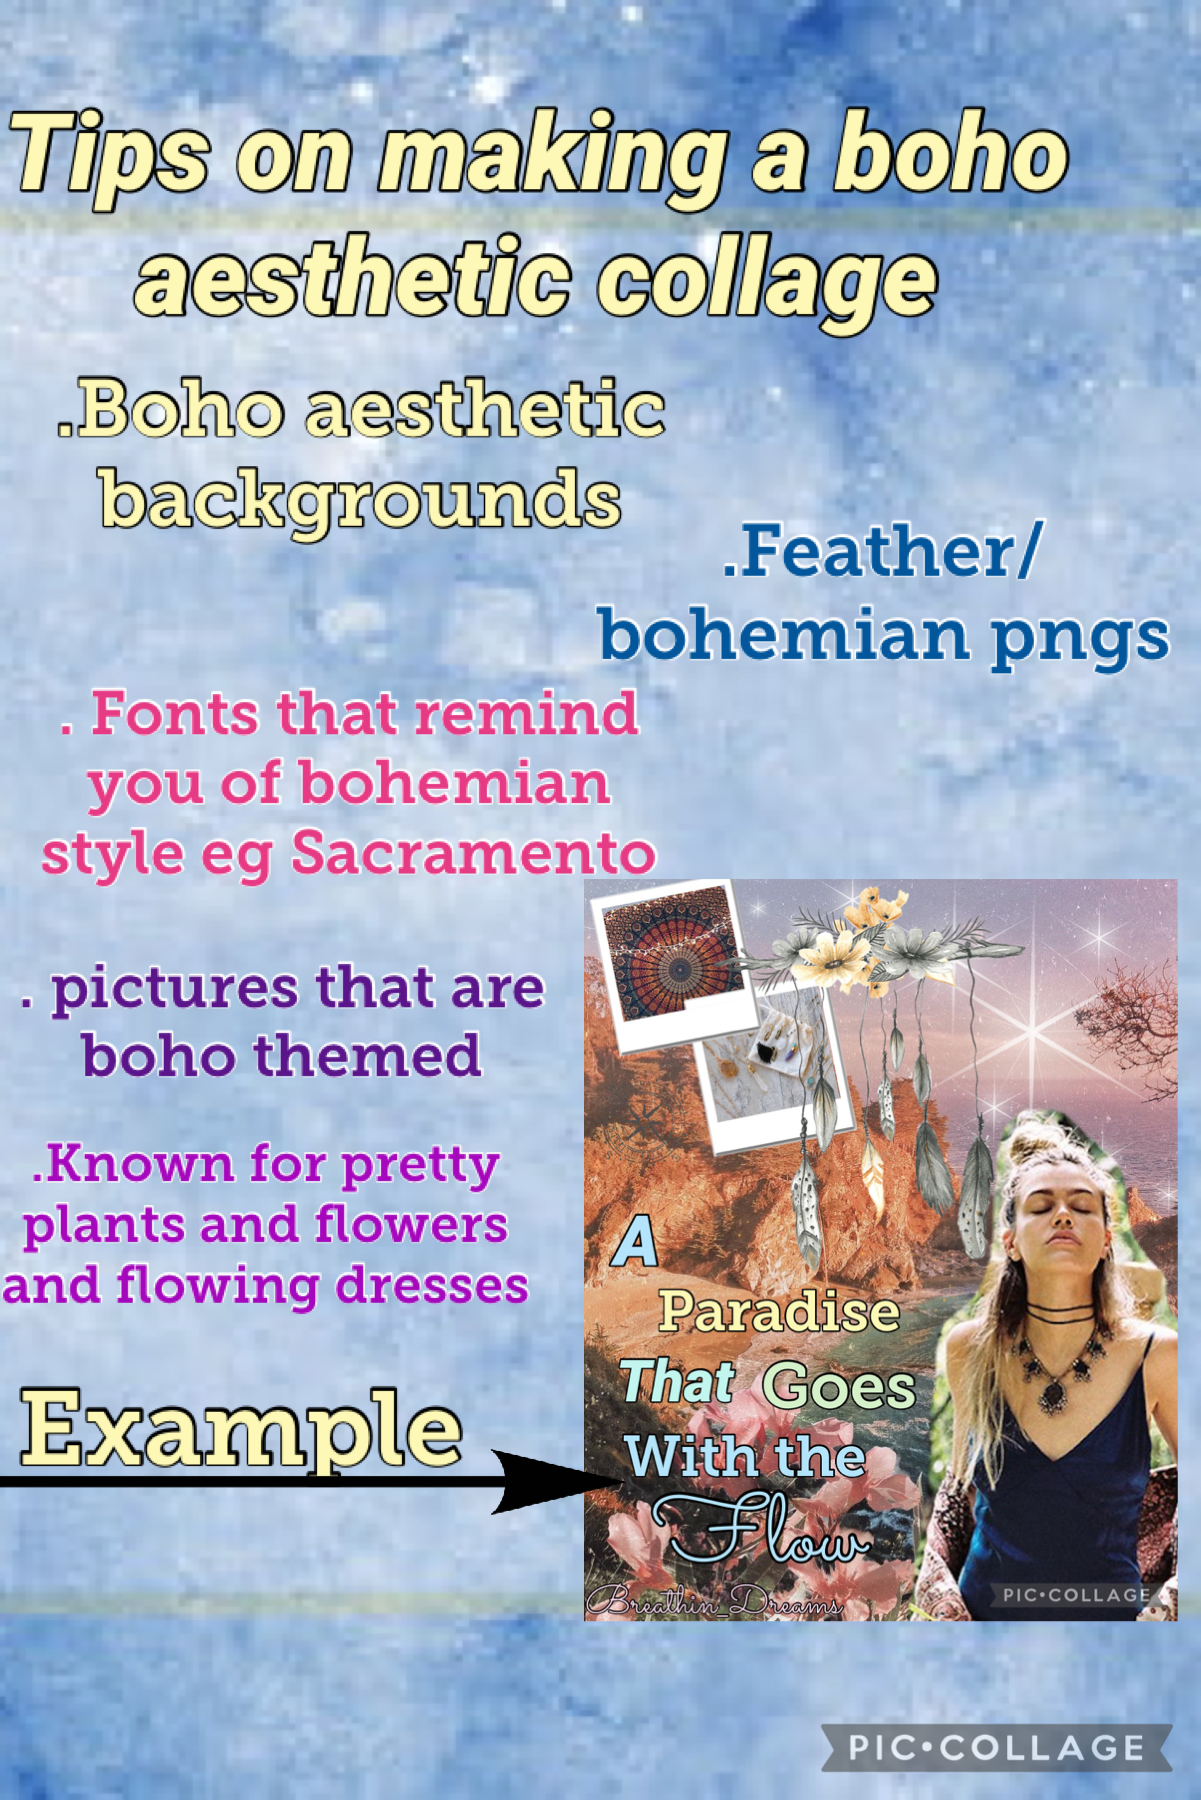 Tips on making a boho aesthetic collage inspired by ocean extras aesthetic series 